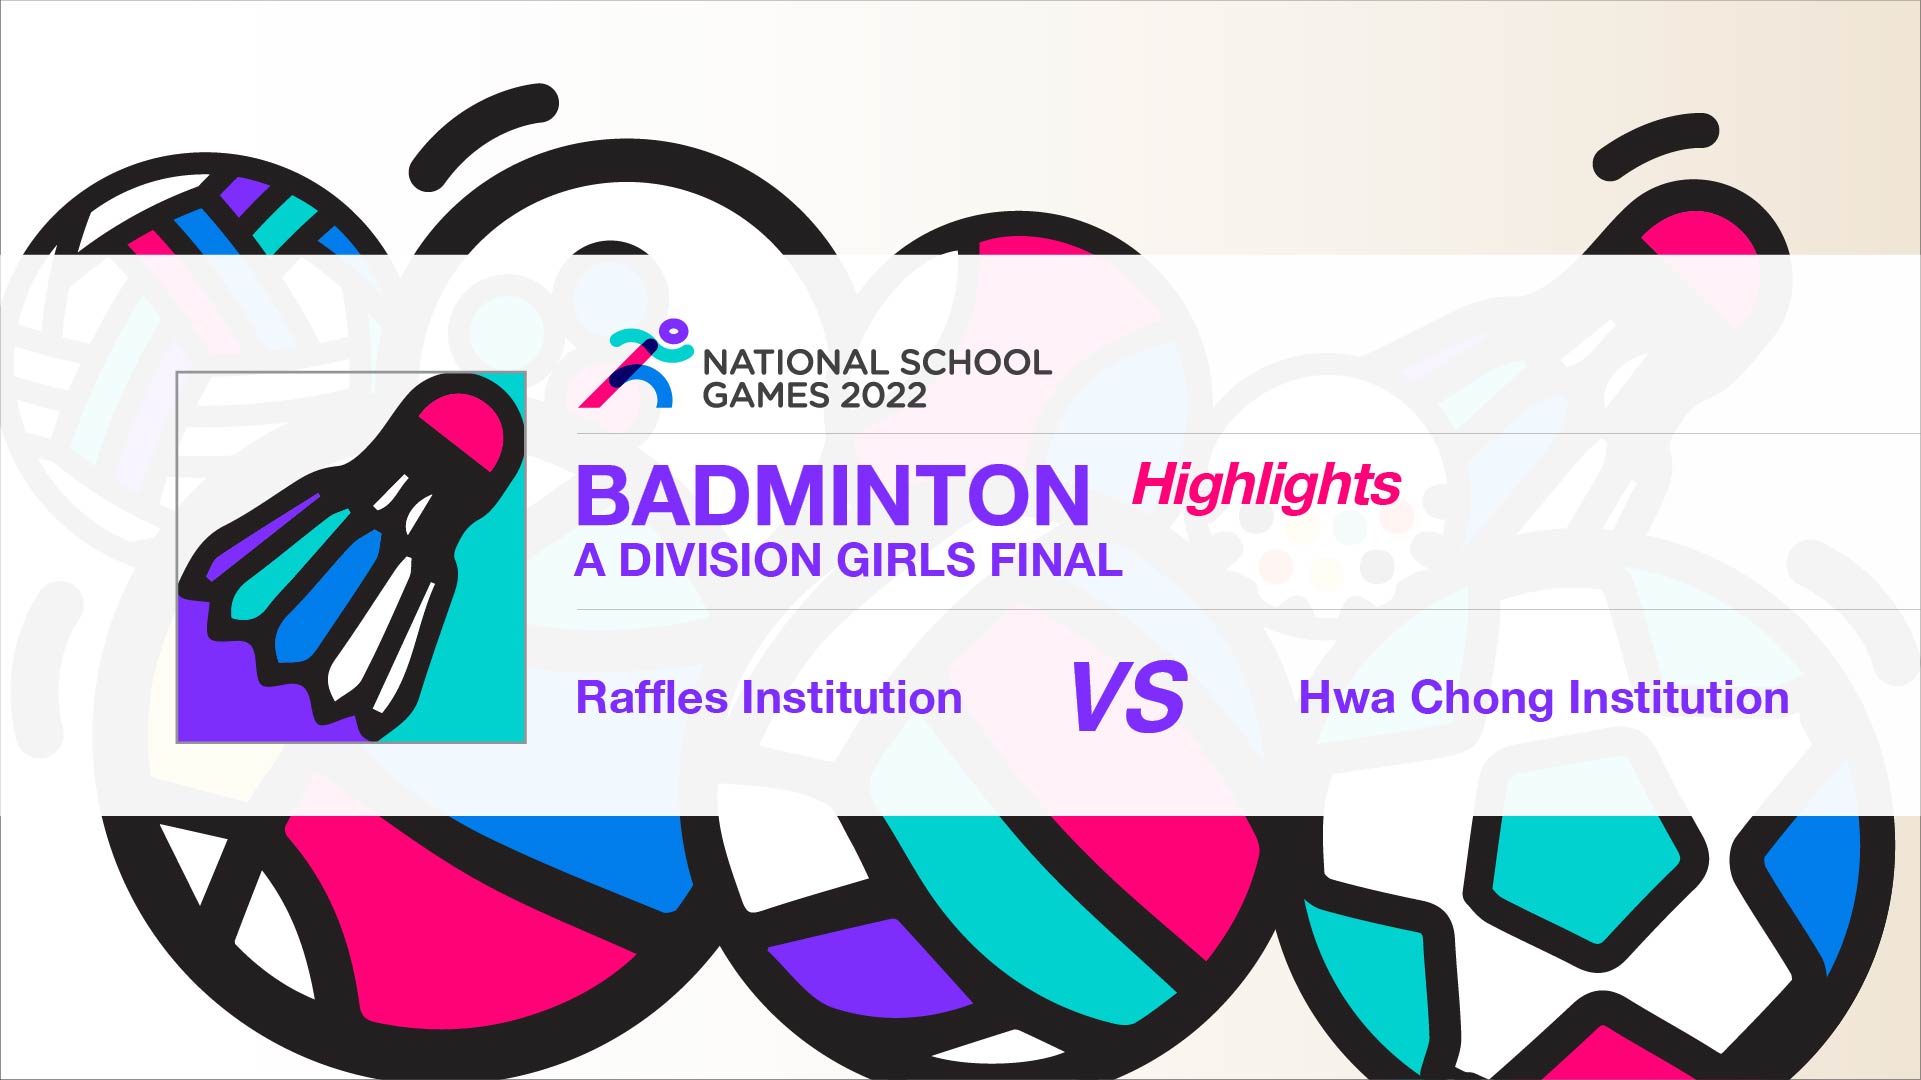 SSSC Badminton A Division Girls Final | Raffles Institution vs Hwa Chong Institution - Highlights